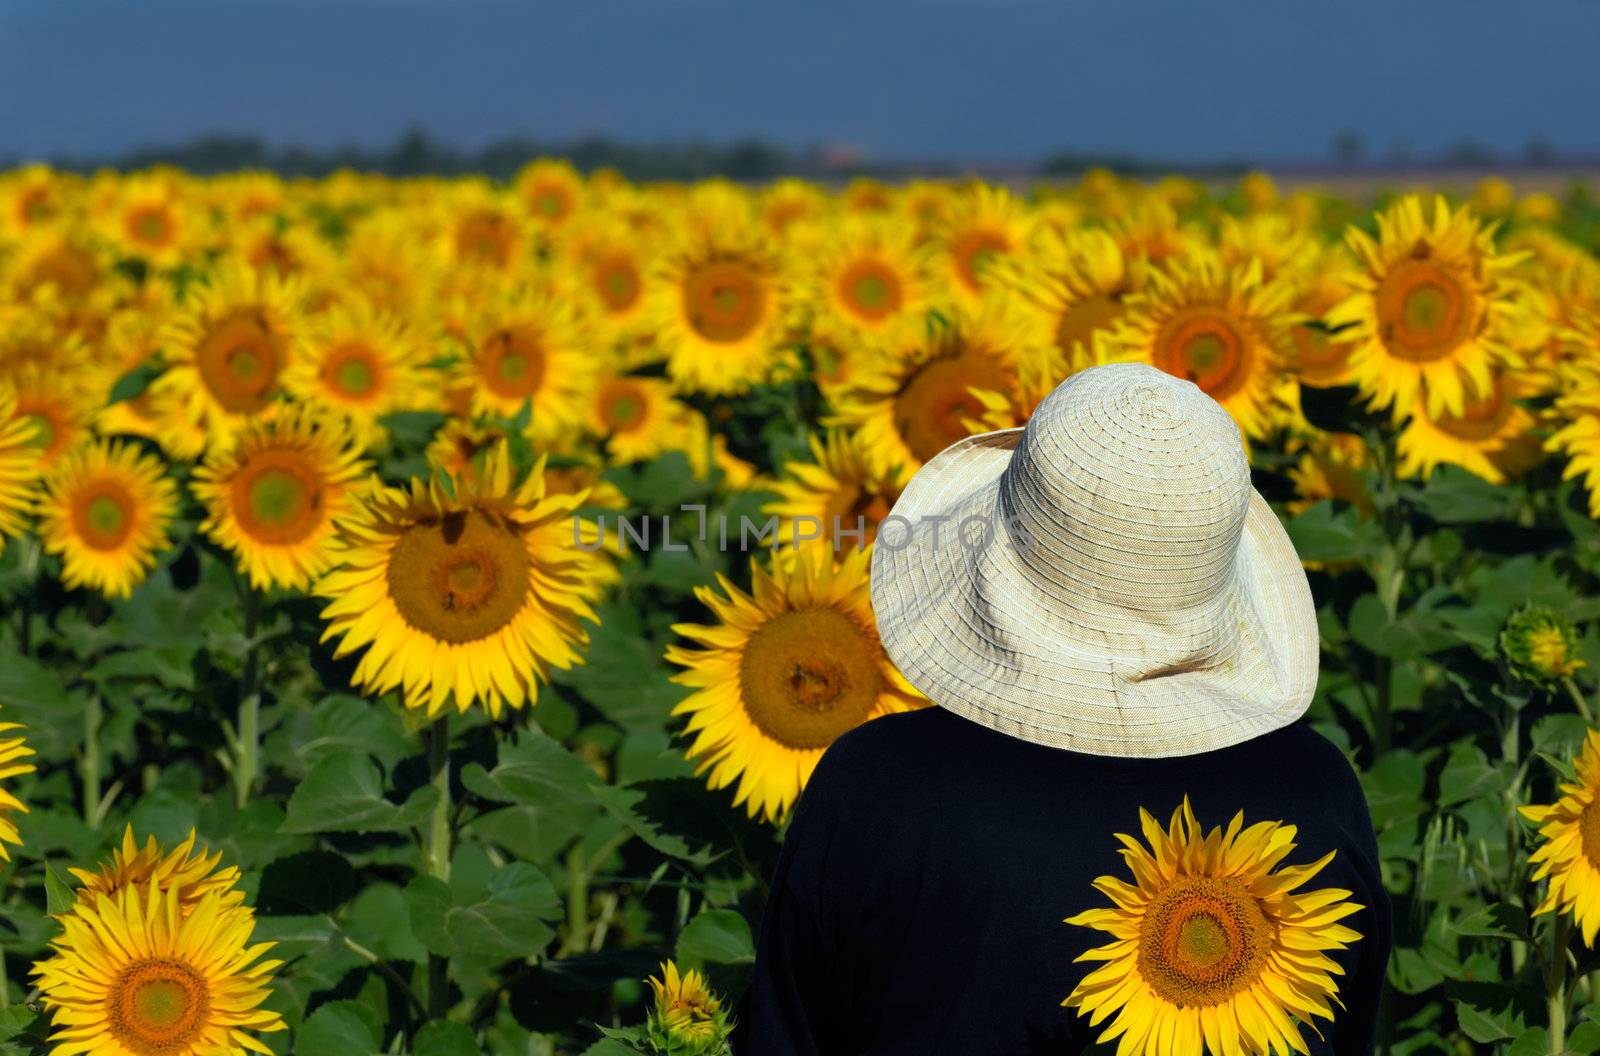 Image of a person in a white hat looking at a sunflower field in Provence, southern France